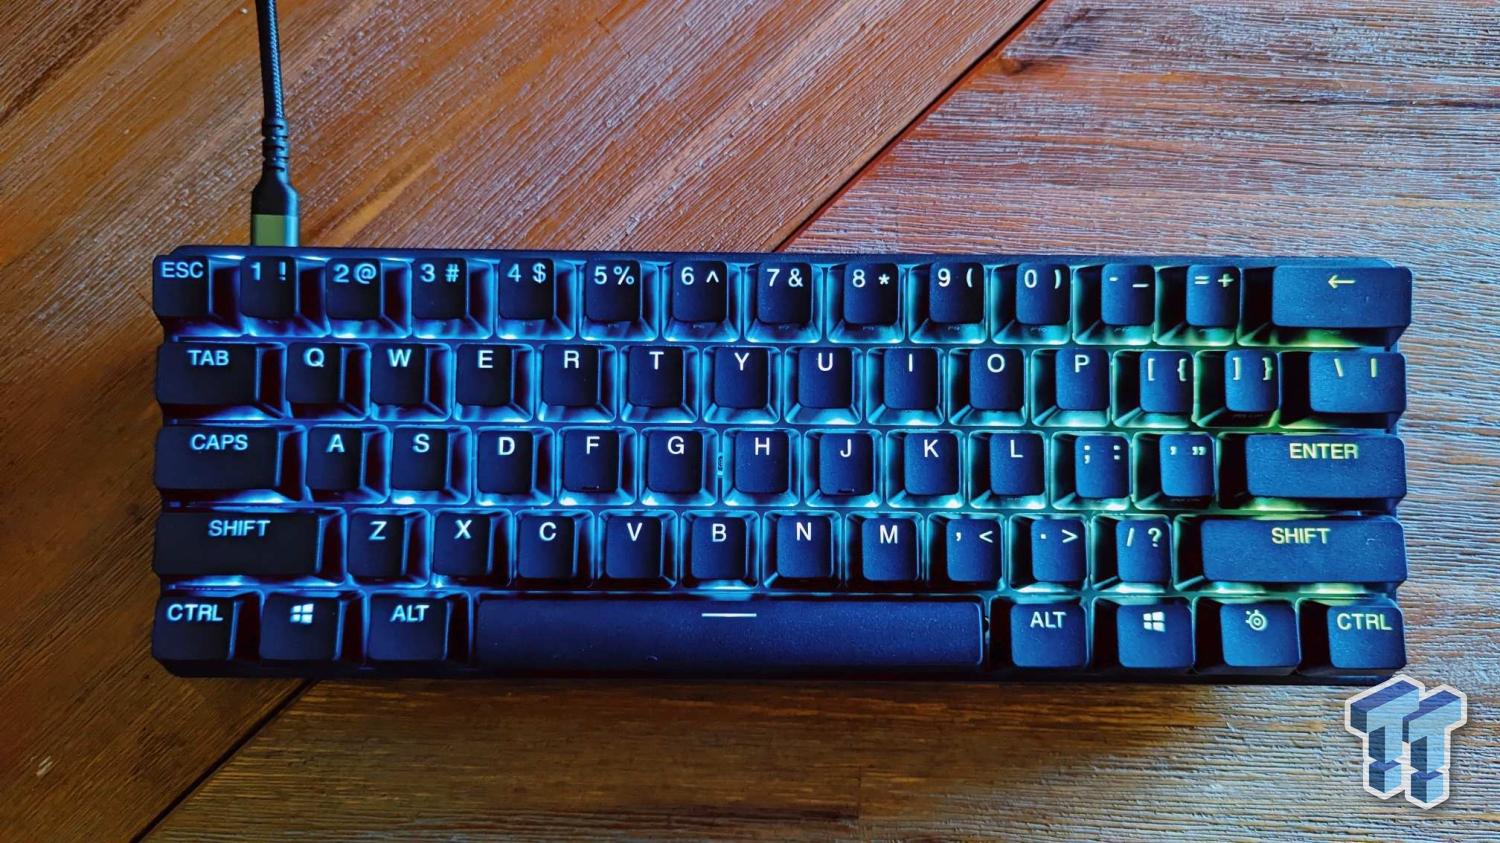 SteelSeries Apex 9 TKL/Mini in review: gaming keyboard with